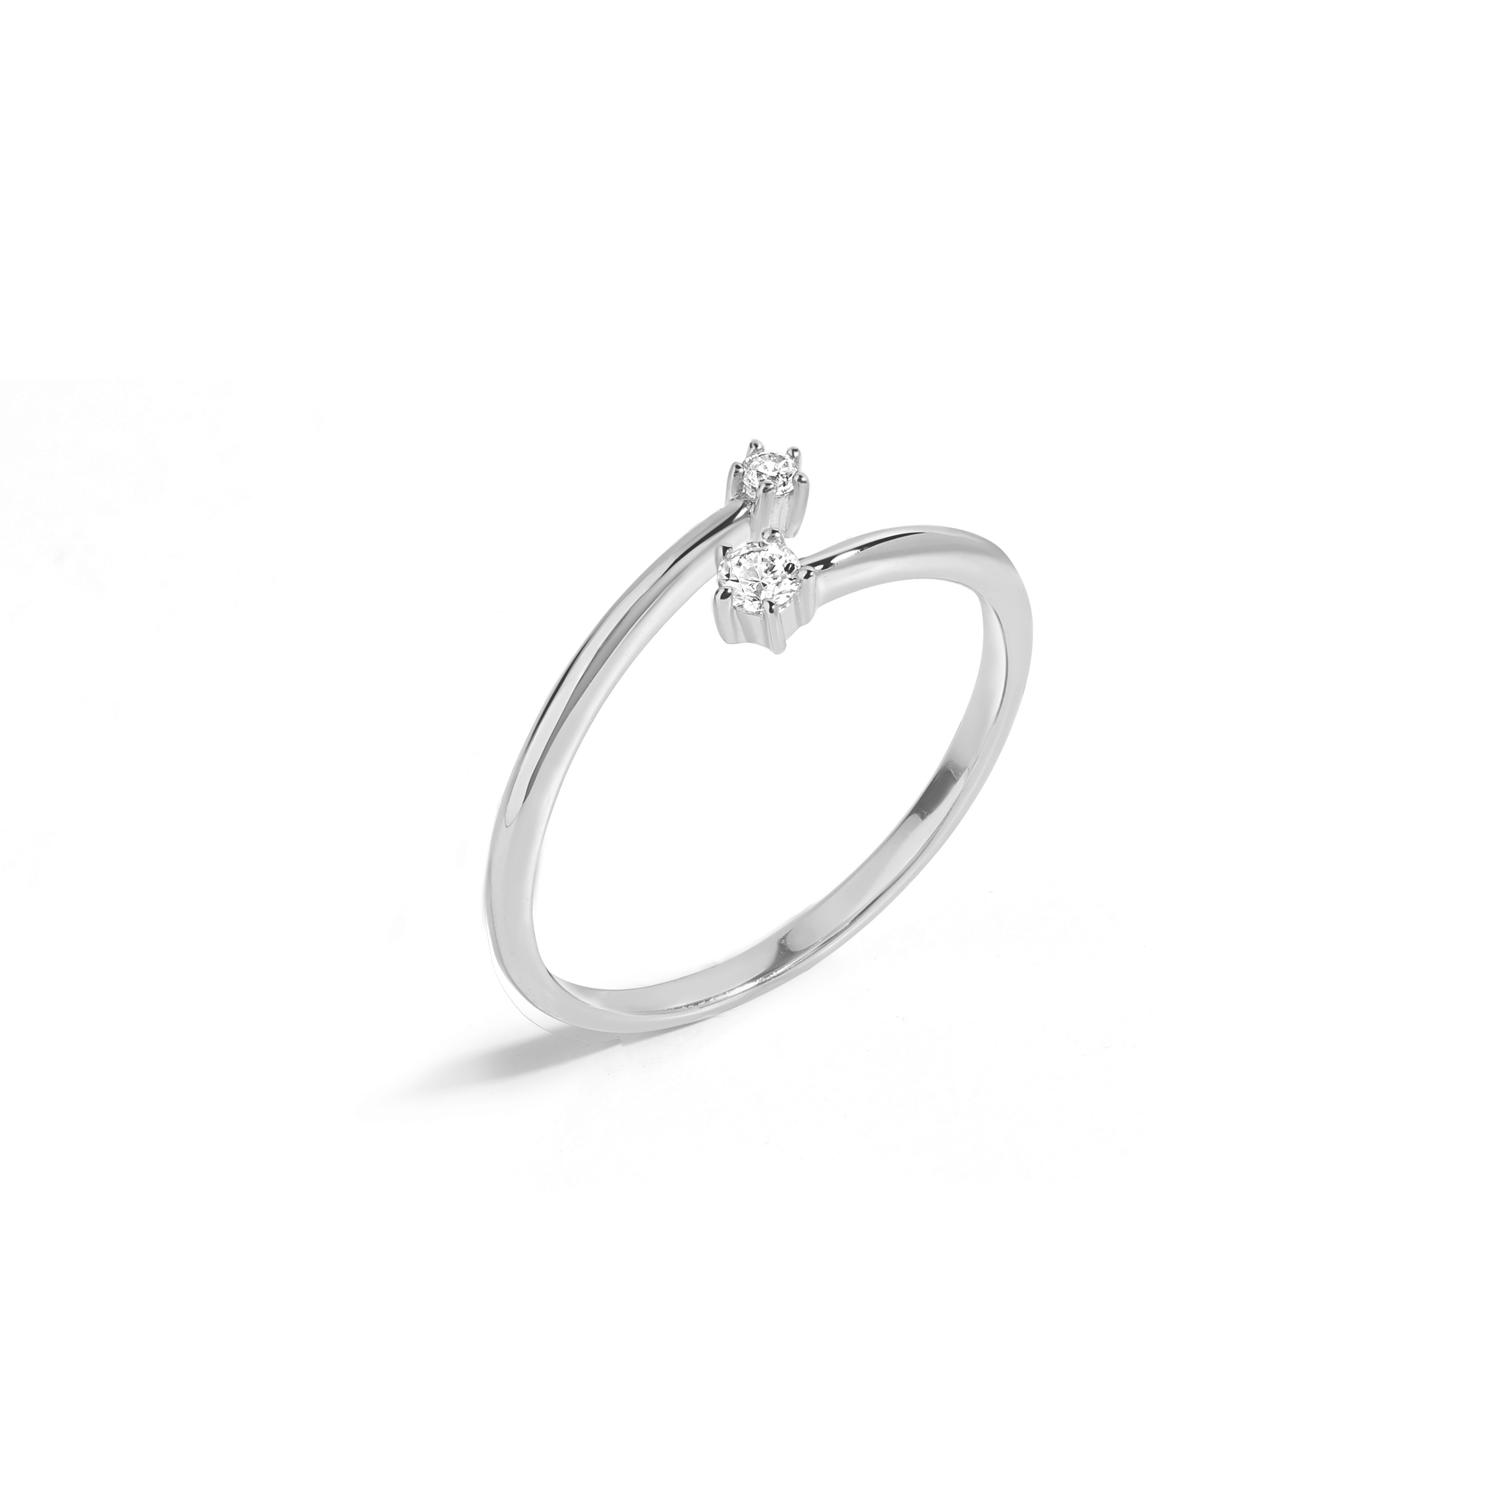 Delicate and elegant ring in 925 silver with cubic zirconia. 